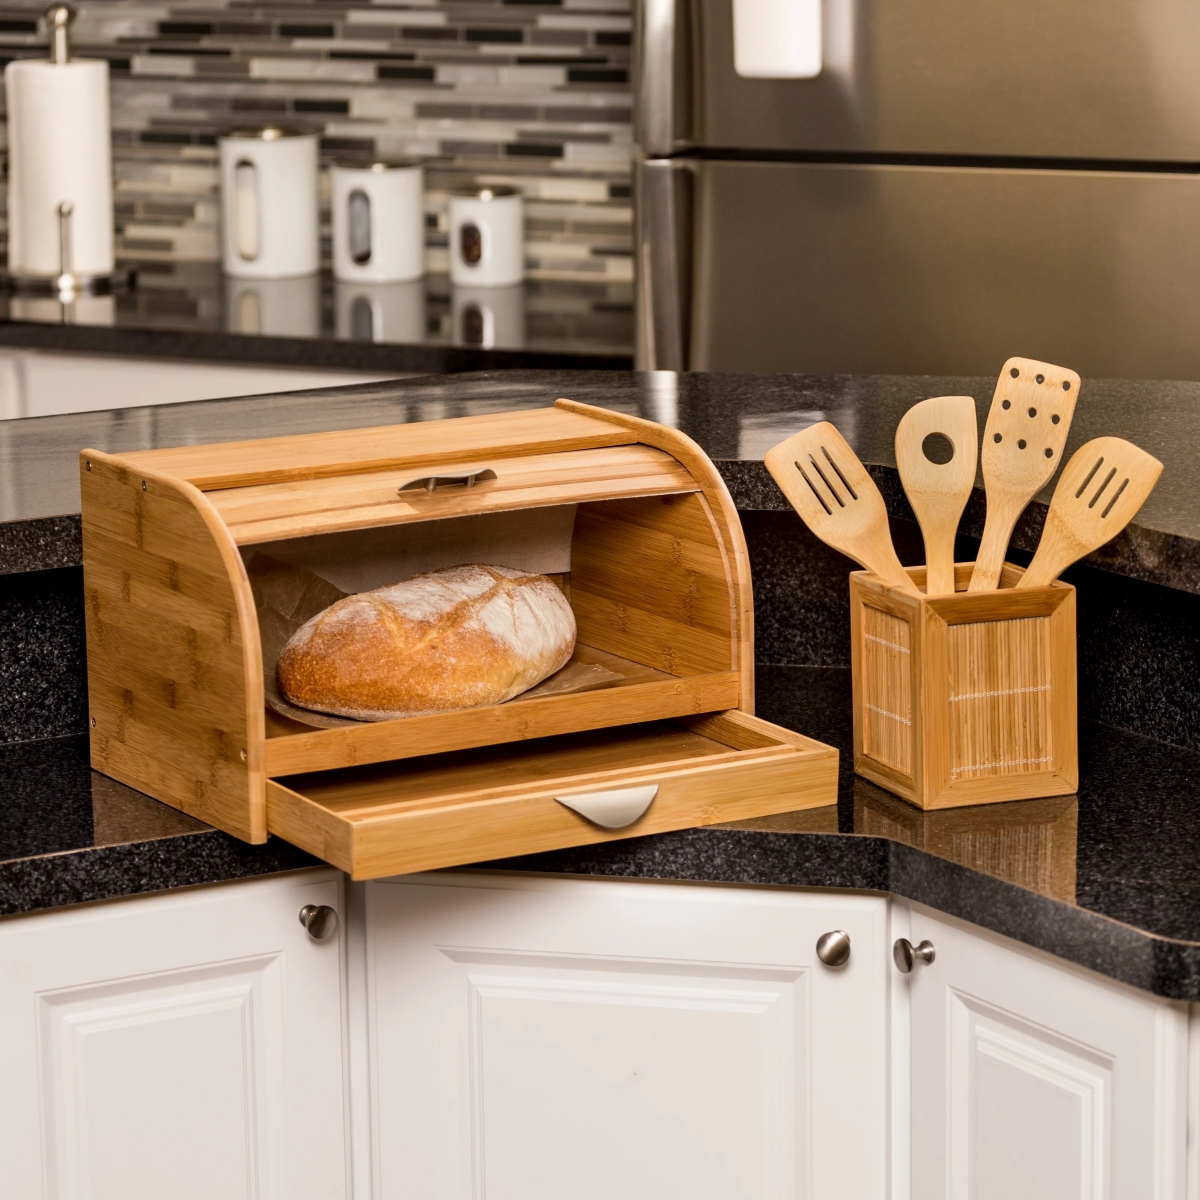 Wooden bread box on black kitchen counter with loaf of bread inside